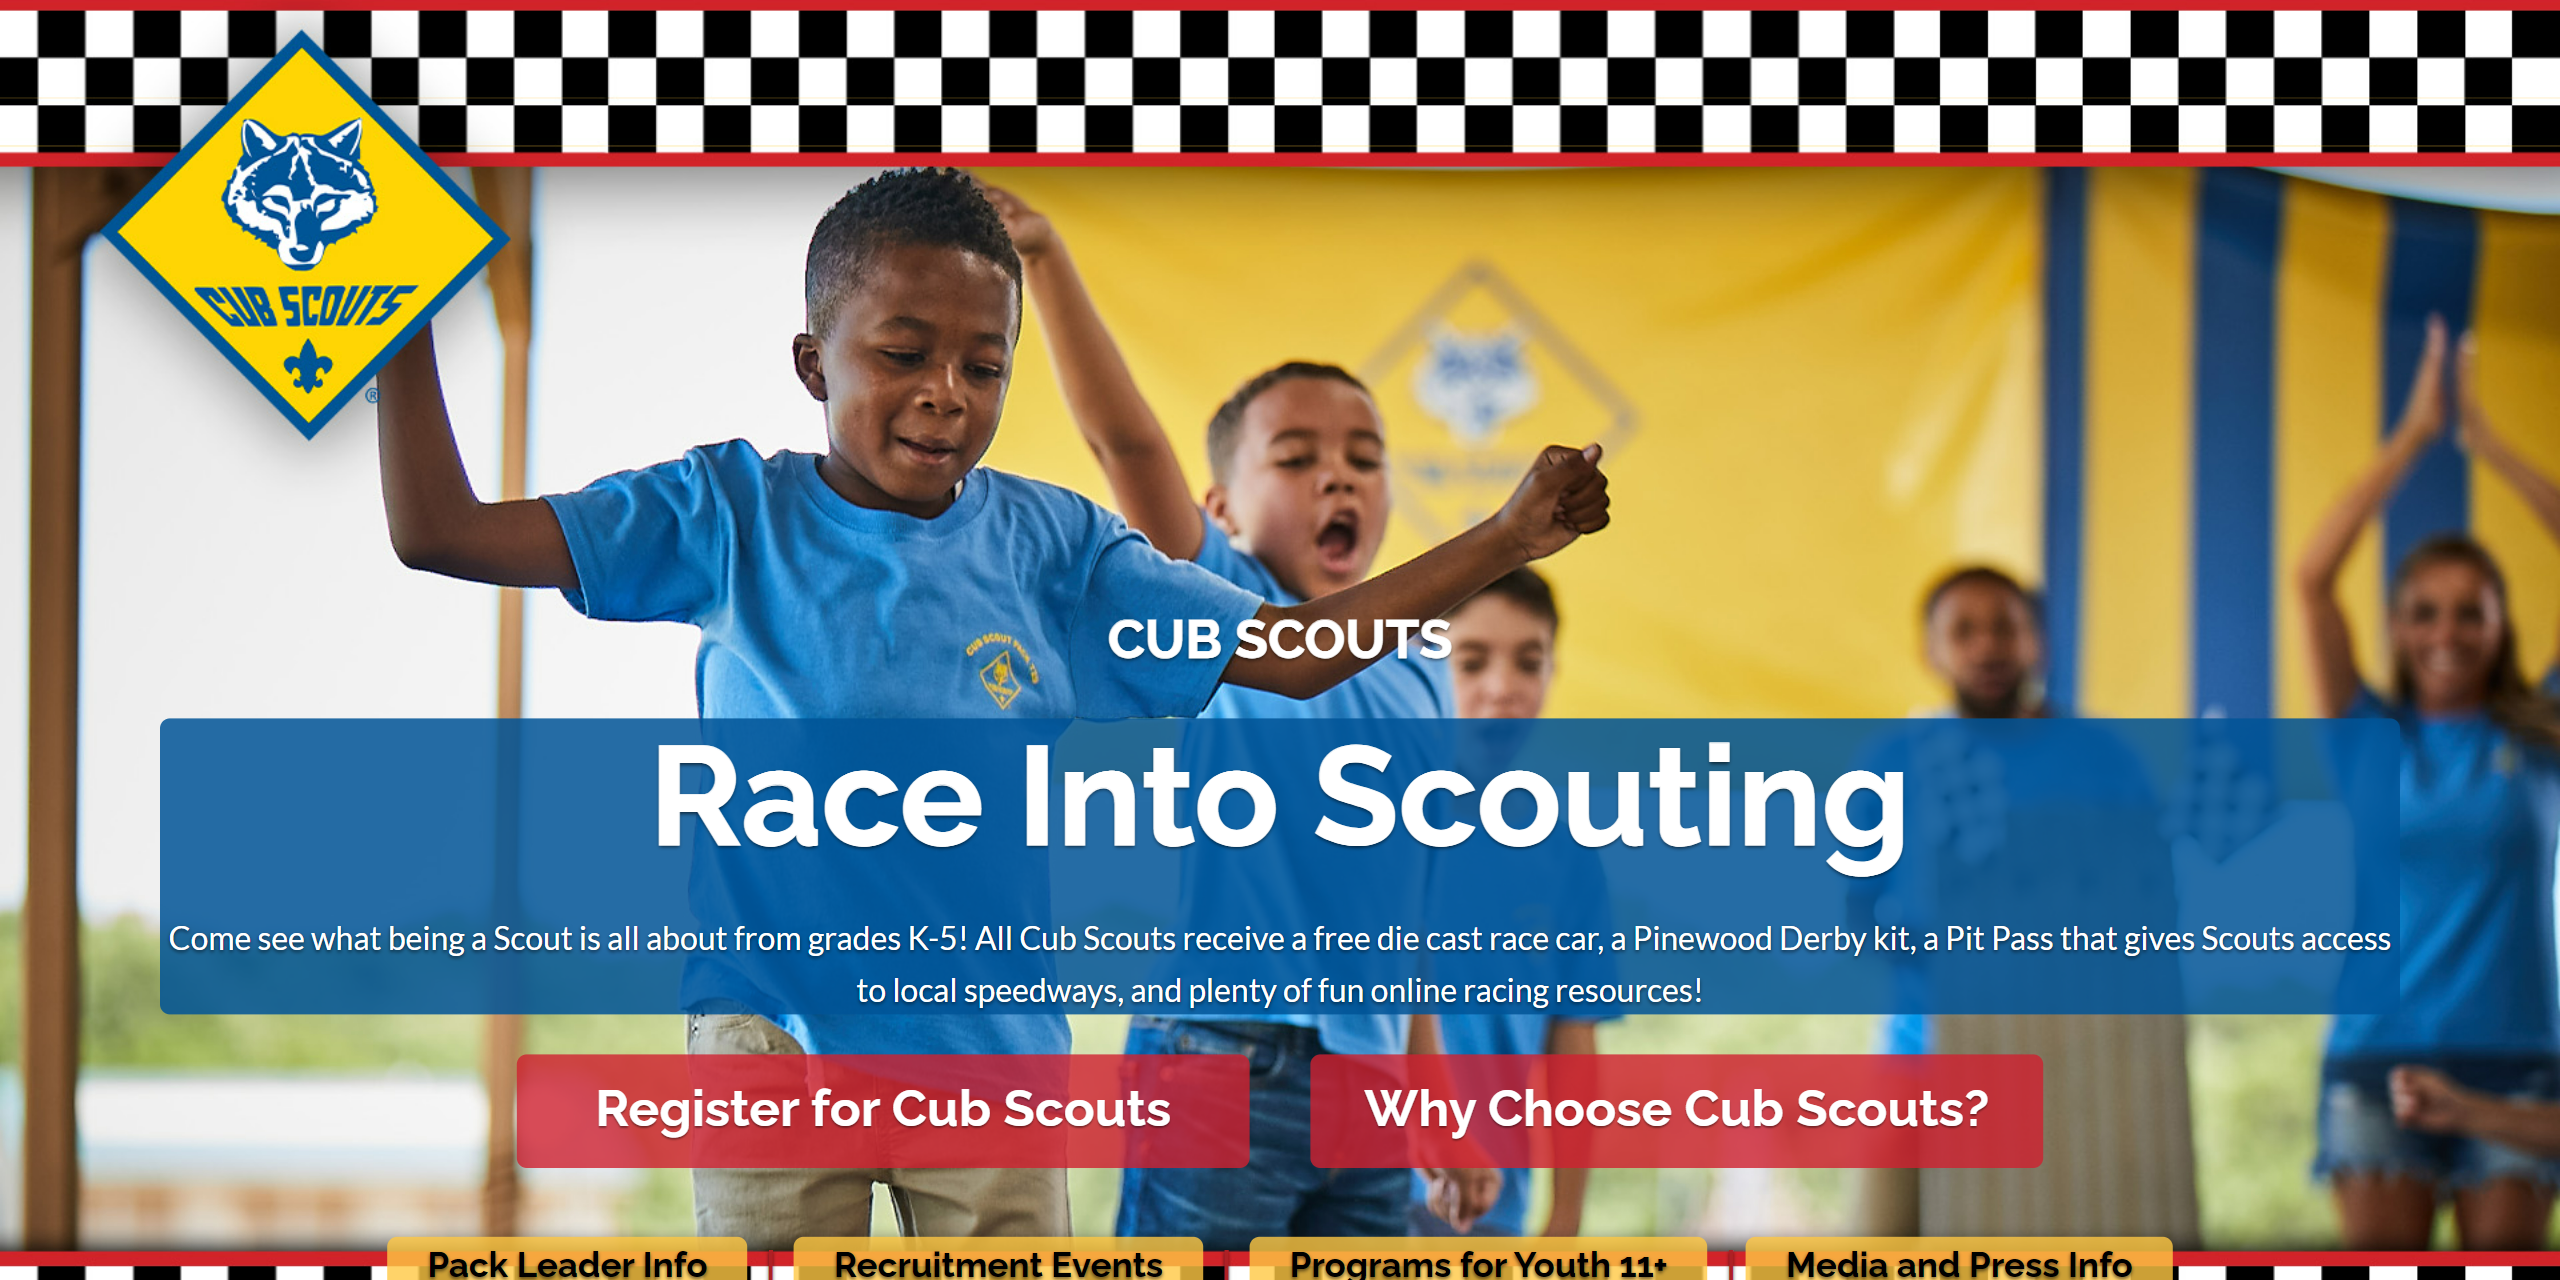 The Join Cubs homepage, showing links to register for Scouting floating over an image of Cub Scouts celebrating.